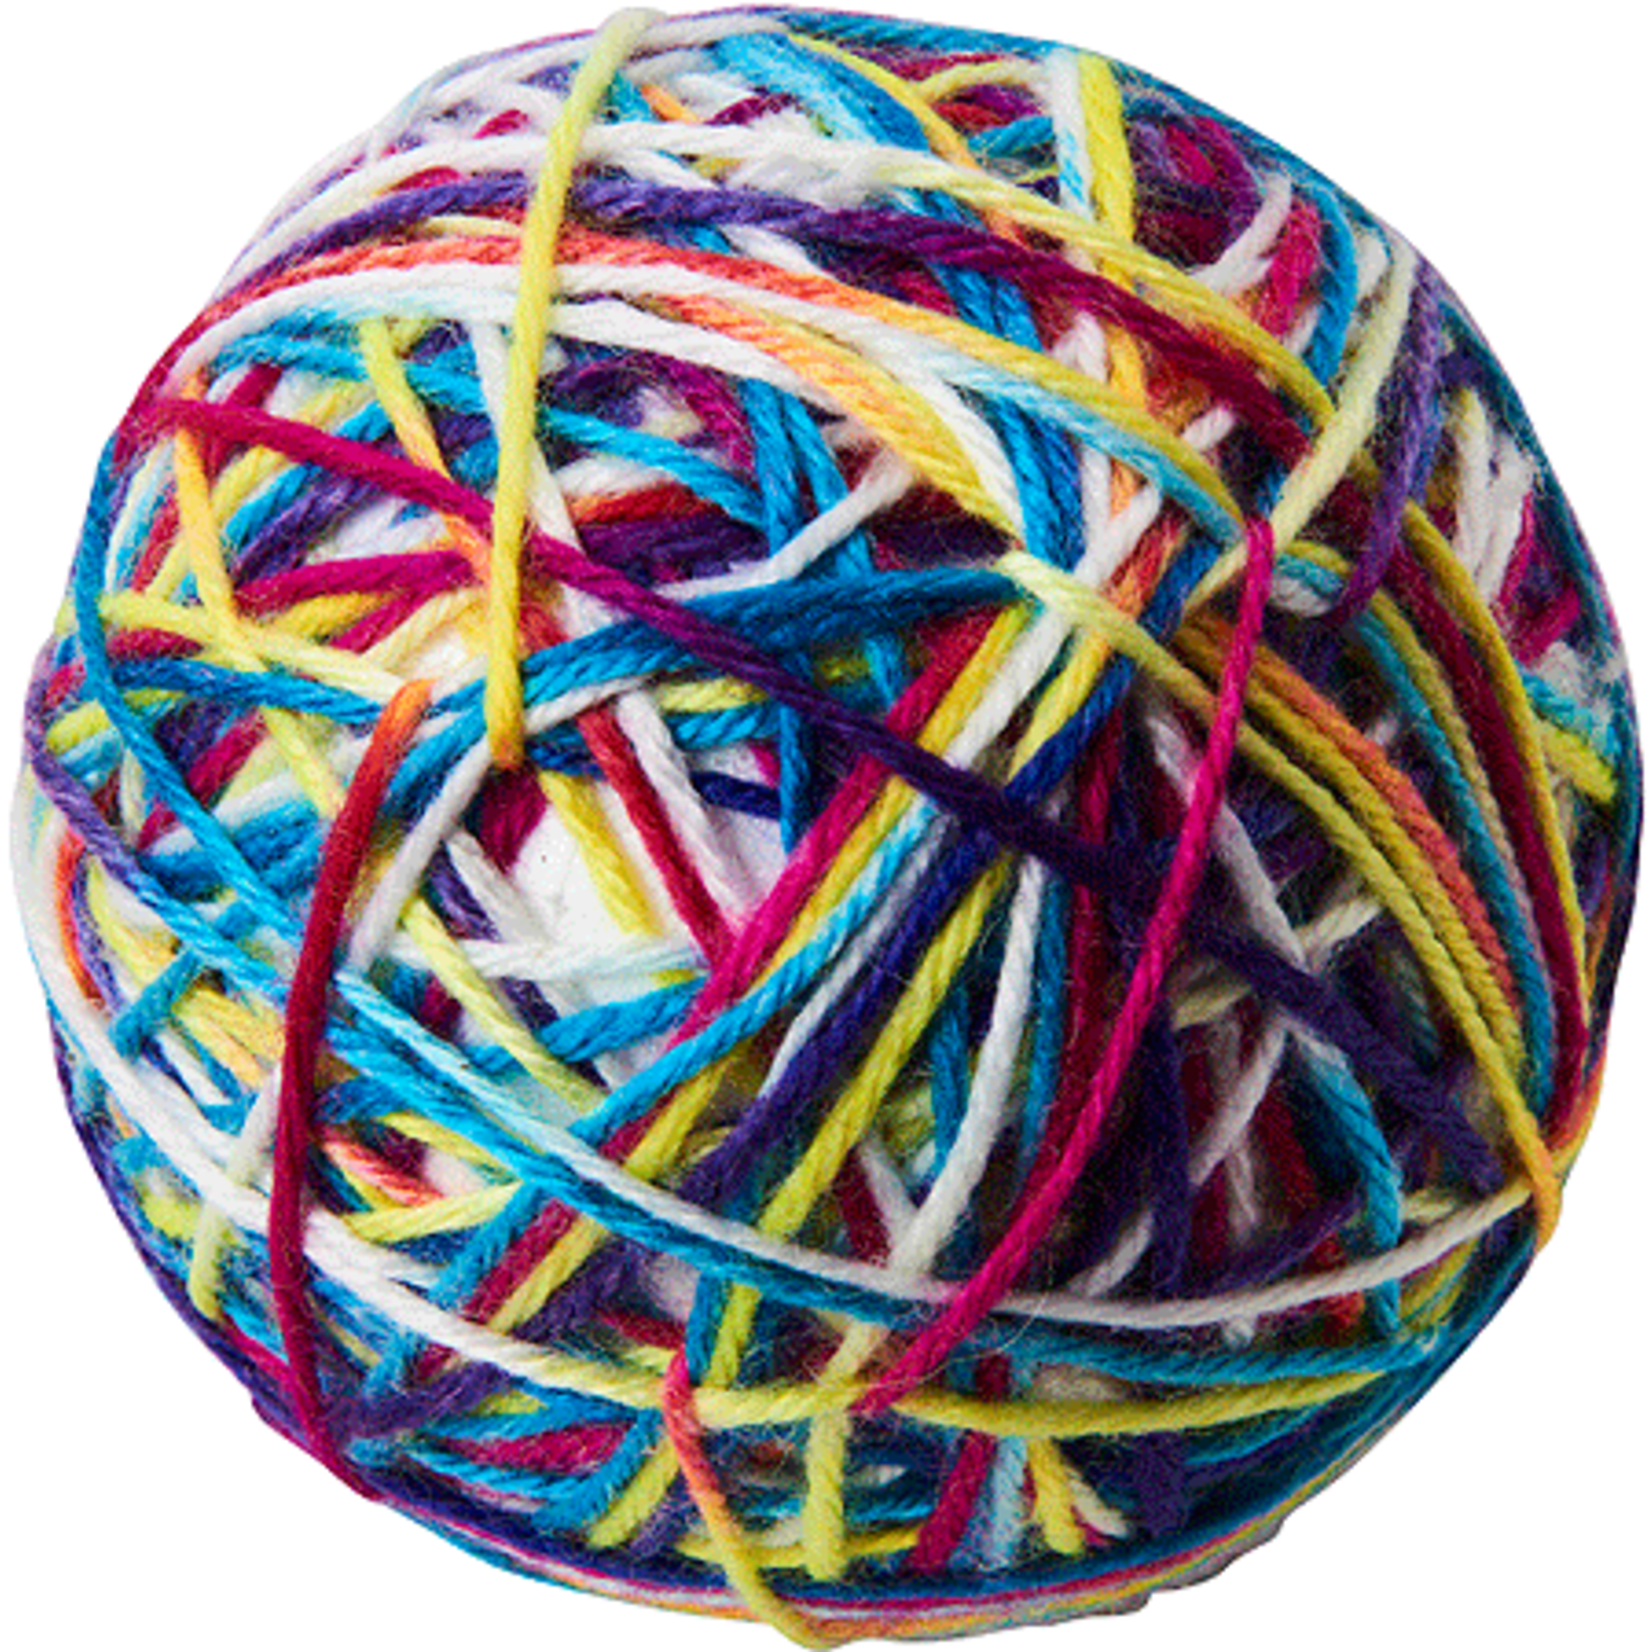 Ethical ETHICAL/SPOT Sew Much Fun Yarn Ball Cat Toys 3.5" 1pk